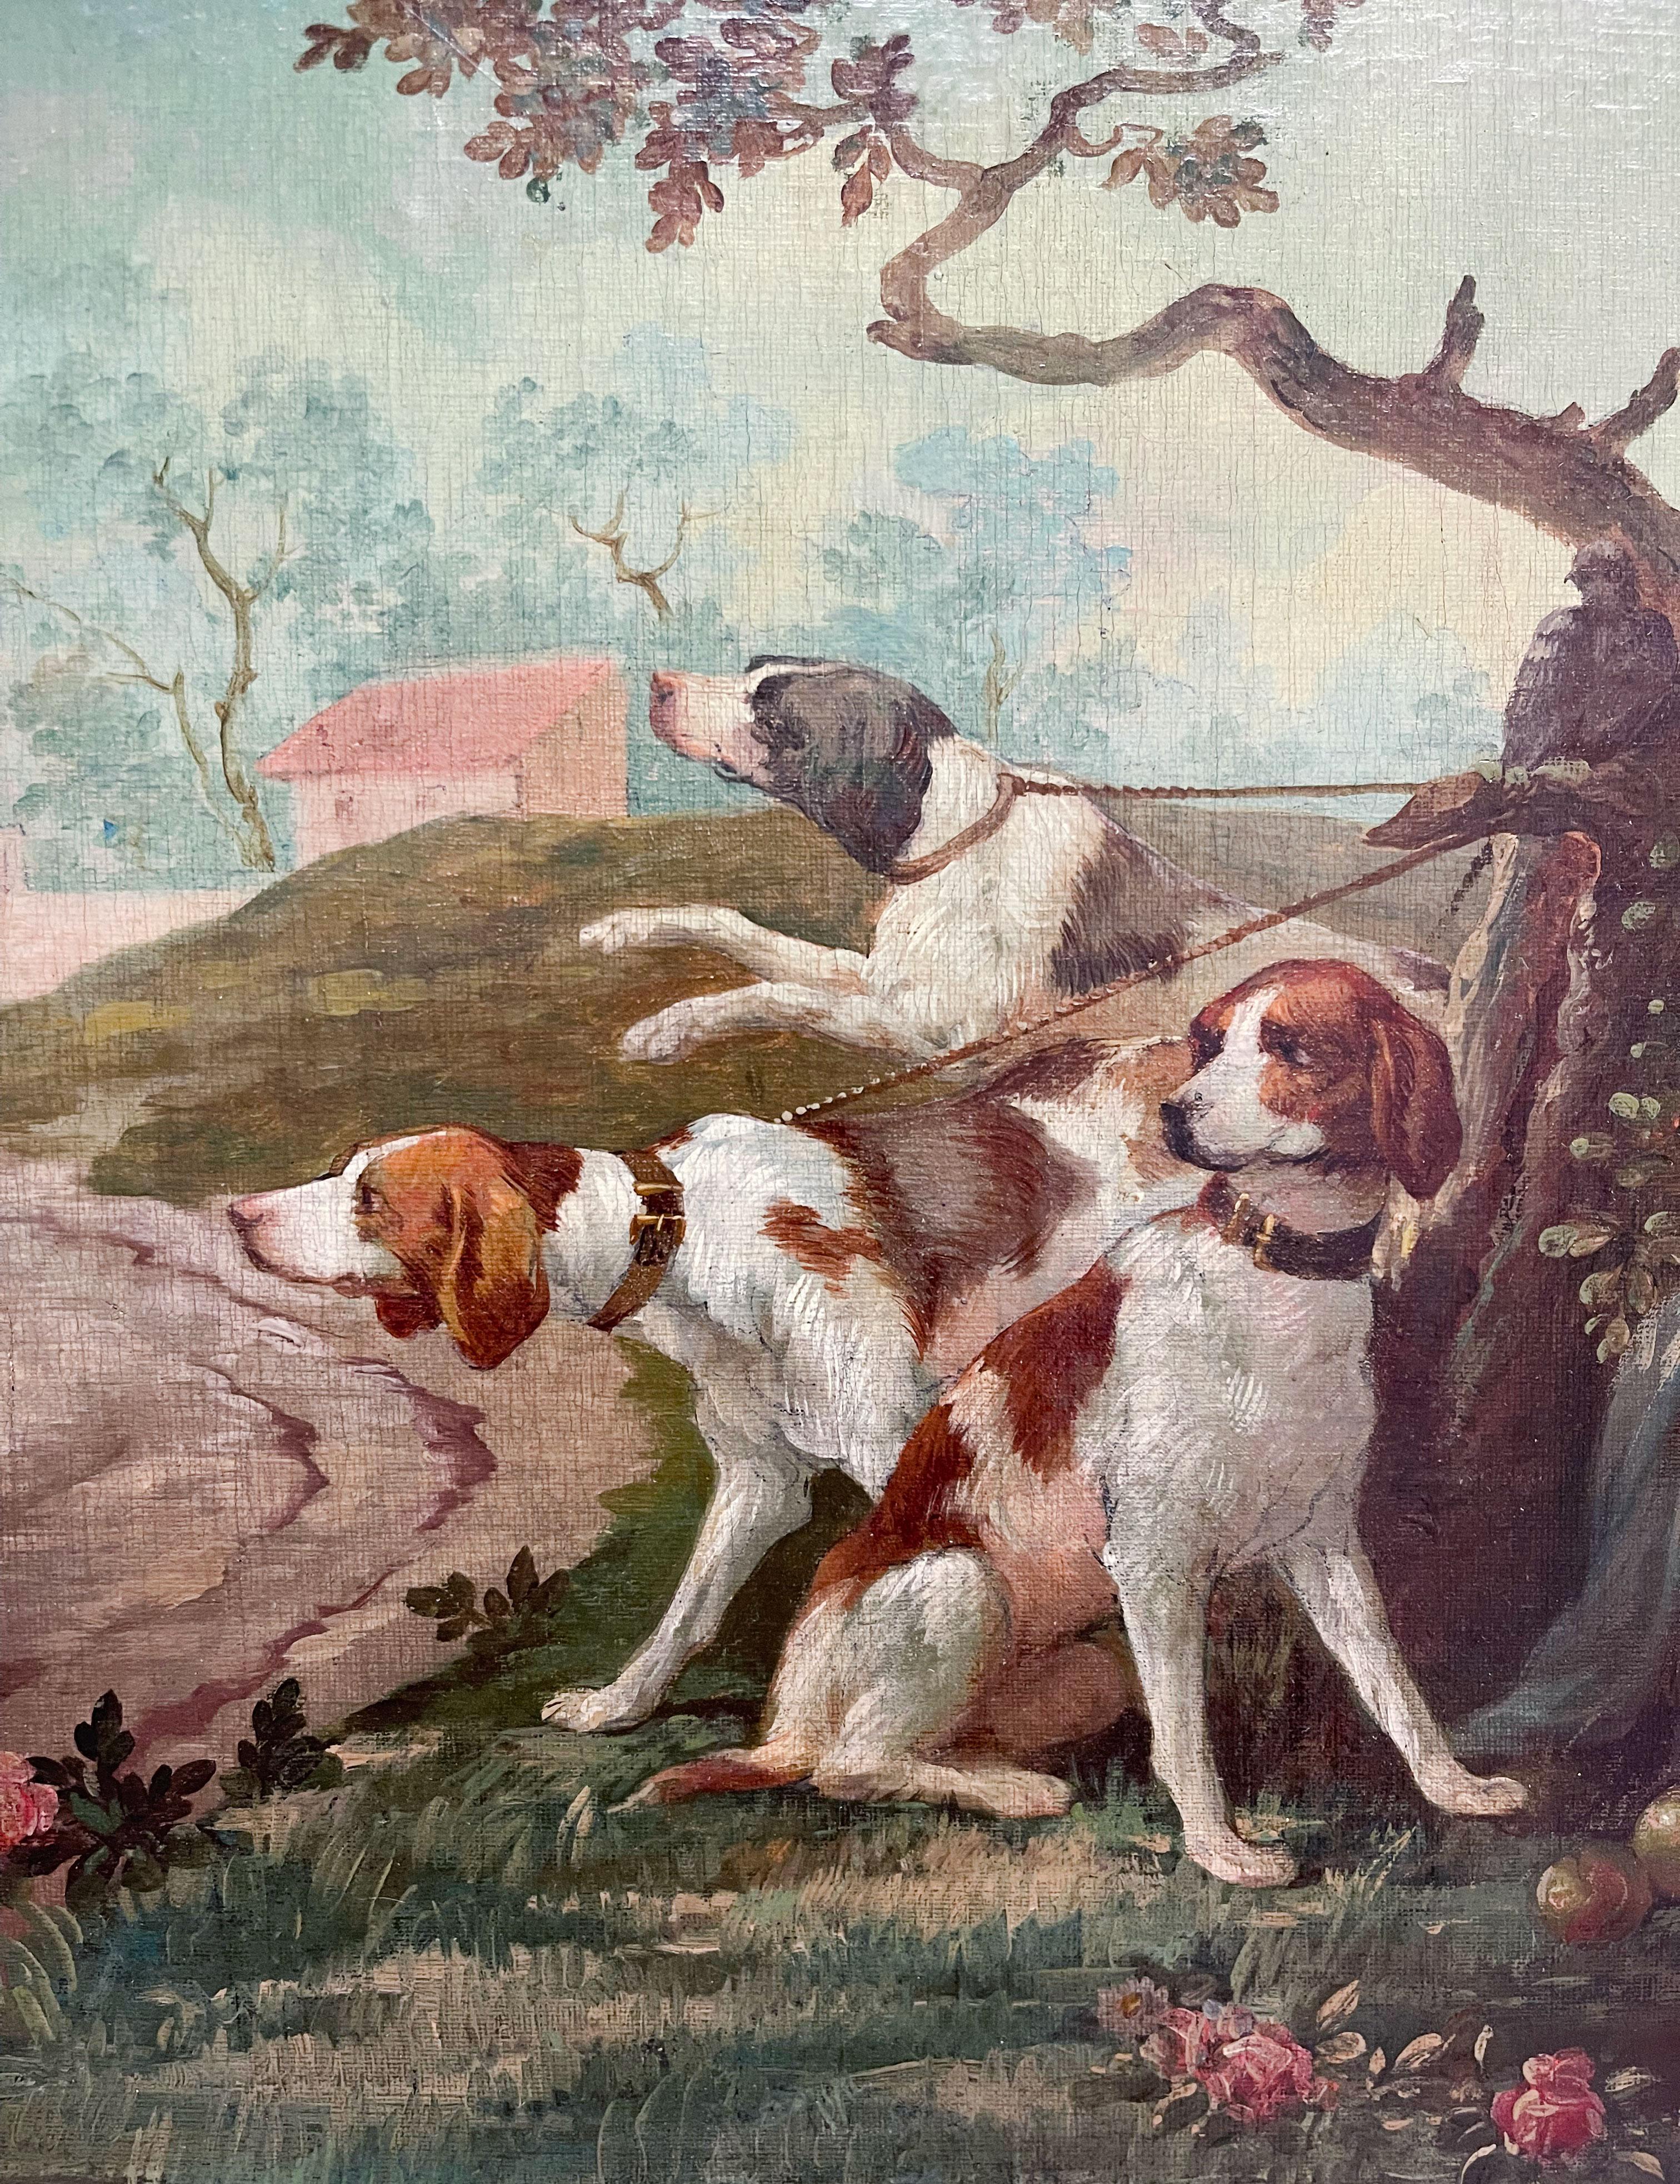 Oil on Canvas Painting of Leashed Hounds Tied to a Tree, France, 18th Century In Good Condition For Sale In Pasadena, CA